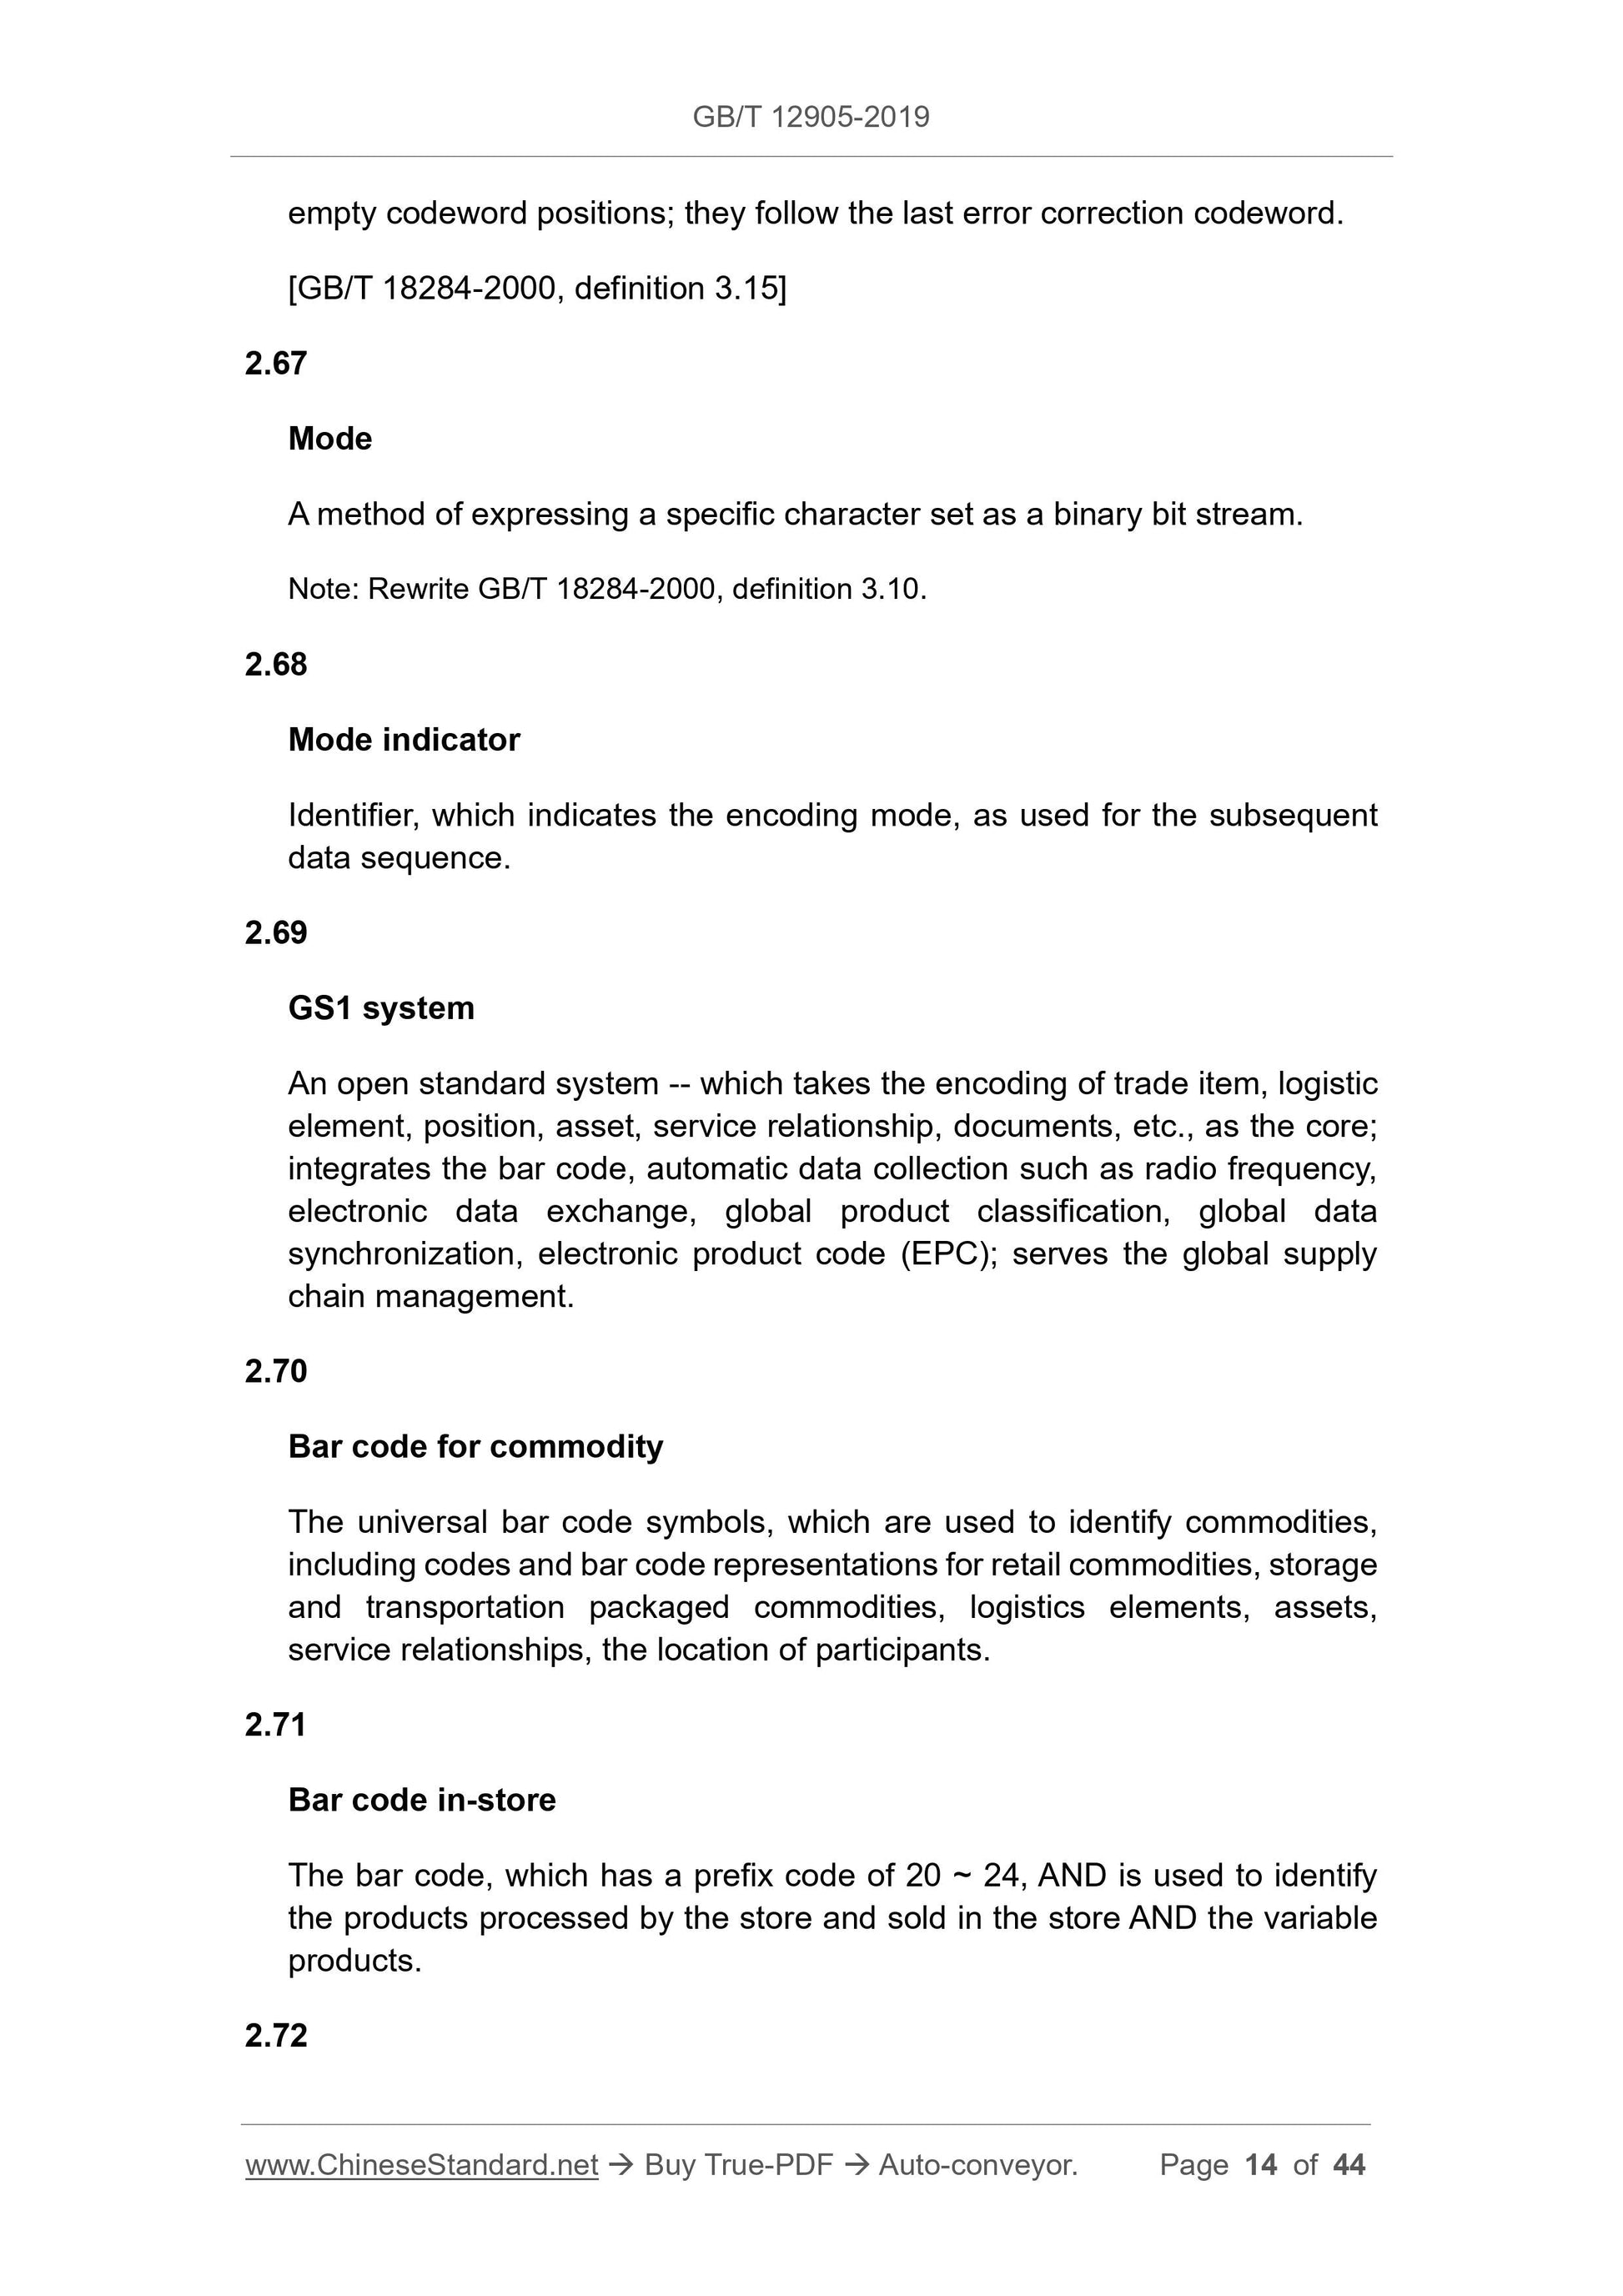 GB/T 12905-2019 Page 7